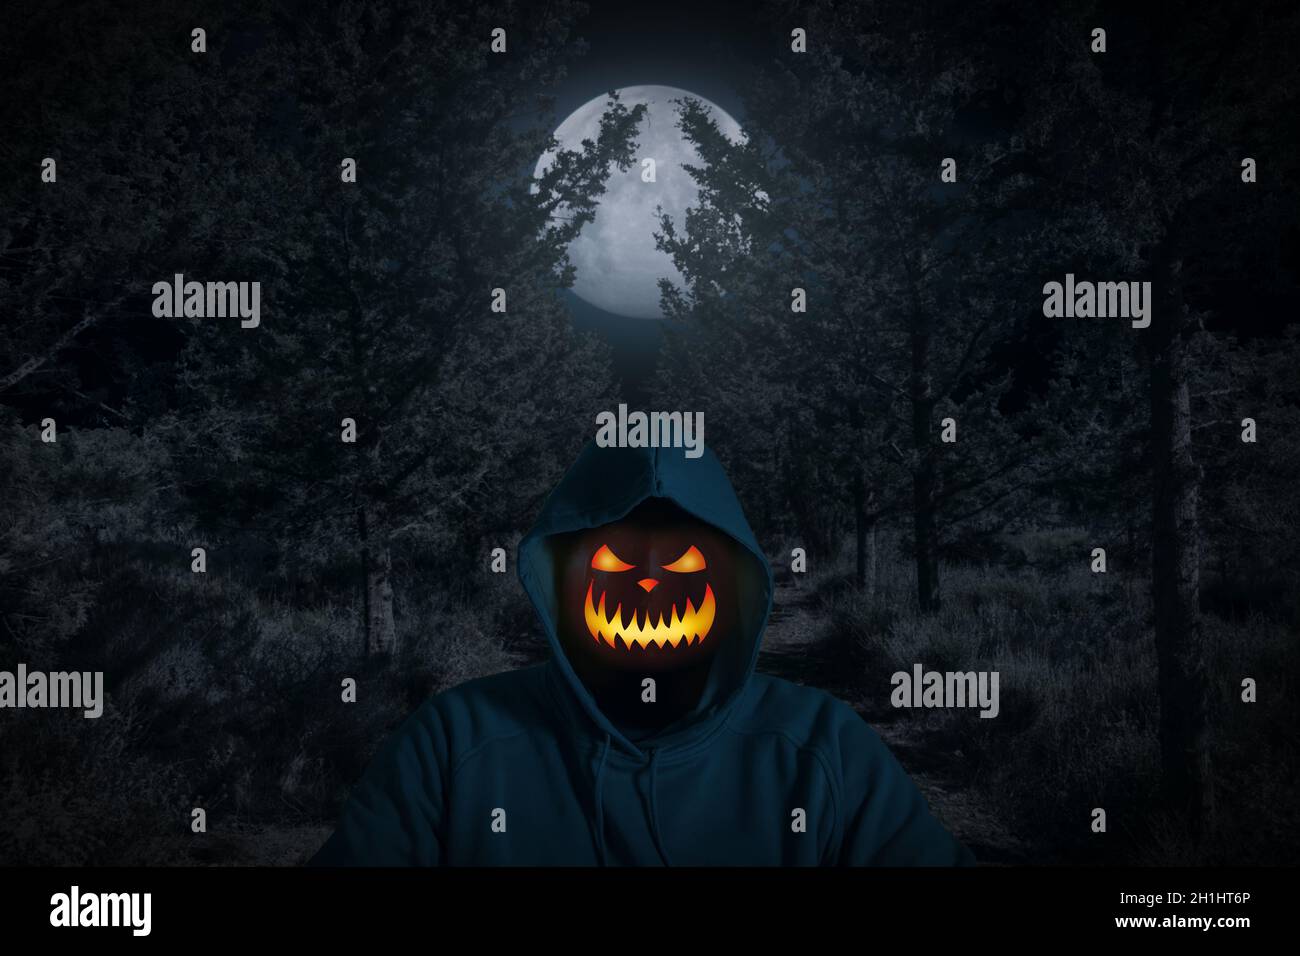 Portrait of a man with a pumpkin instead of a head standing in the dark forest with moon light. Horror Halloween concept. Stock Photo